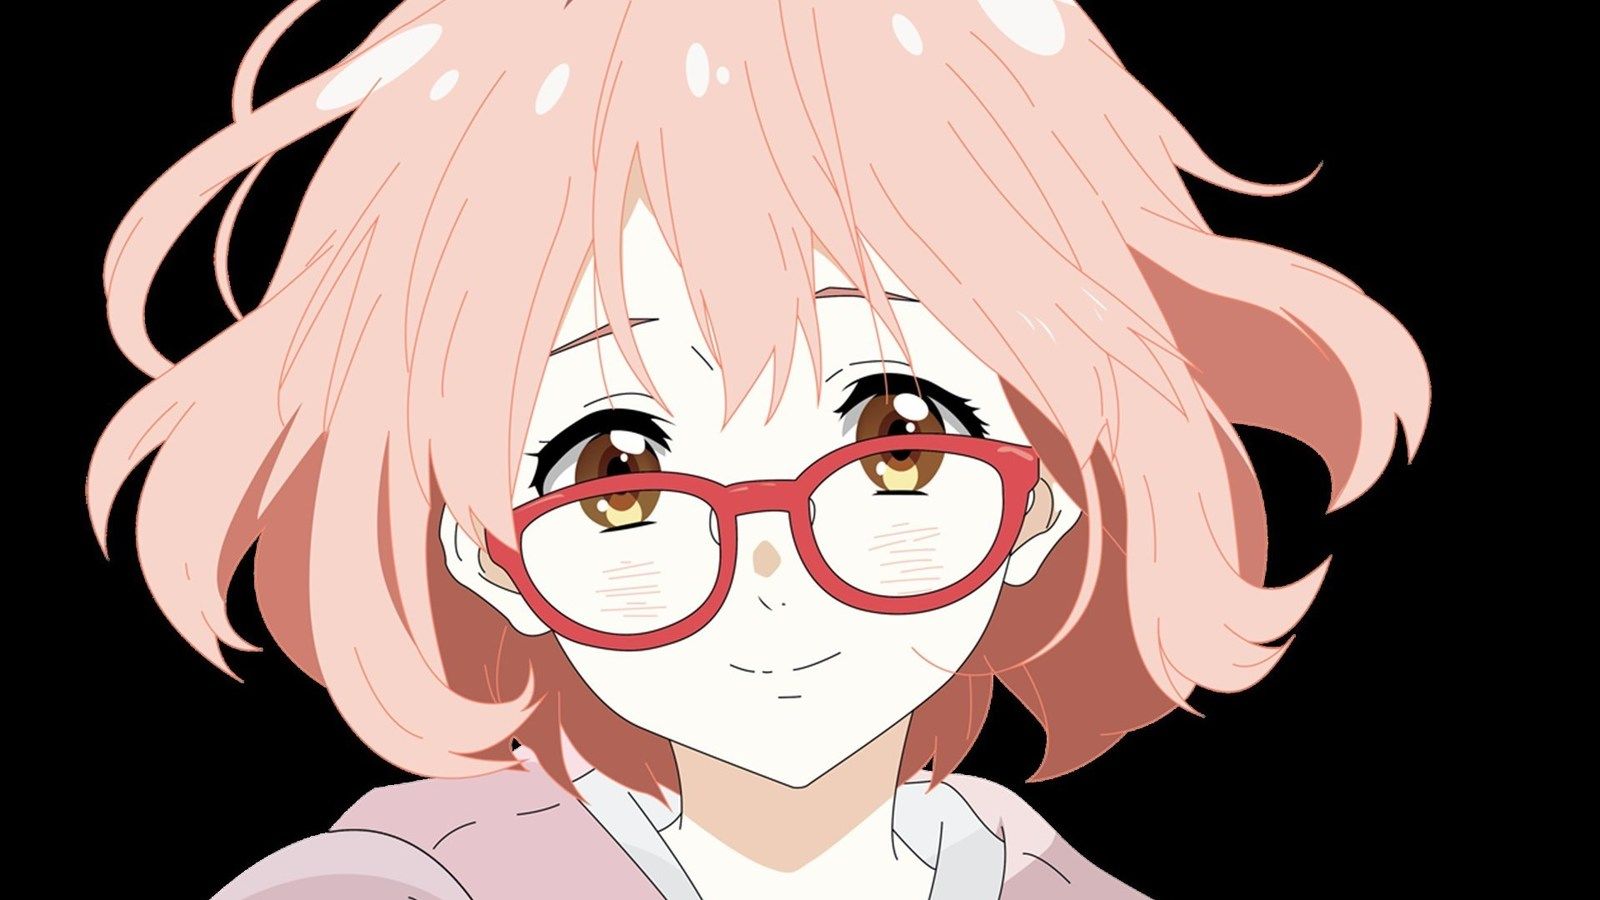 Background Images Wallpapers, Wallpaper Backgrounds, - Mirai Kuriyama , HD Wallpaper & Backgrounds